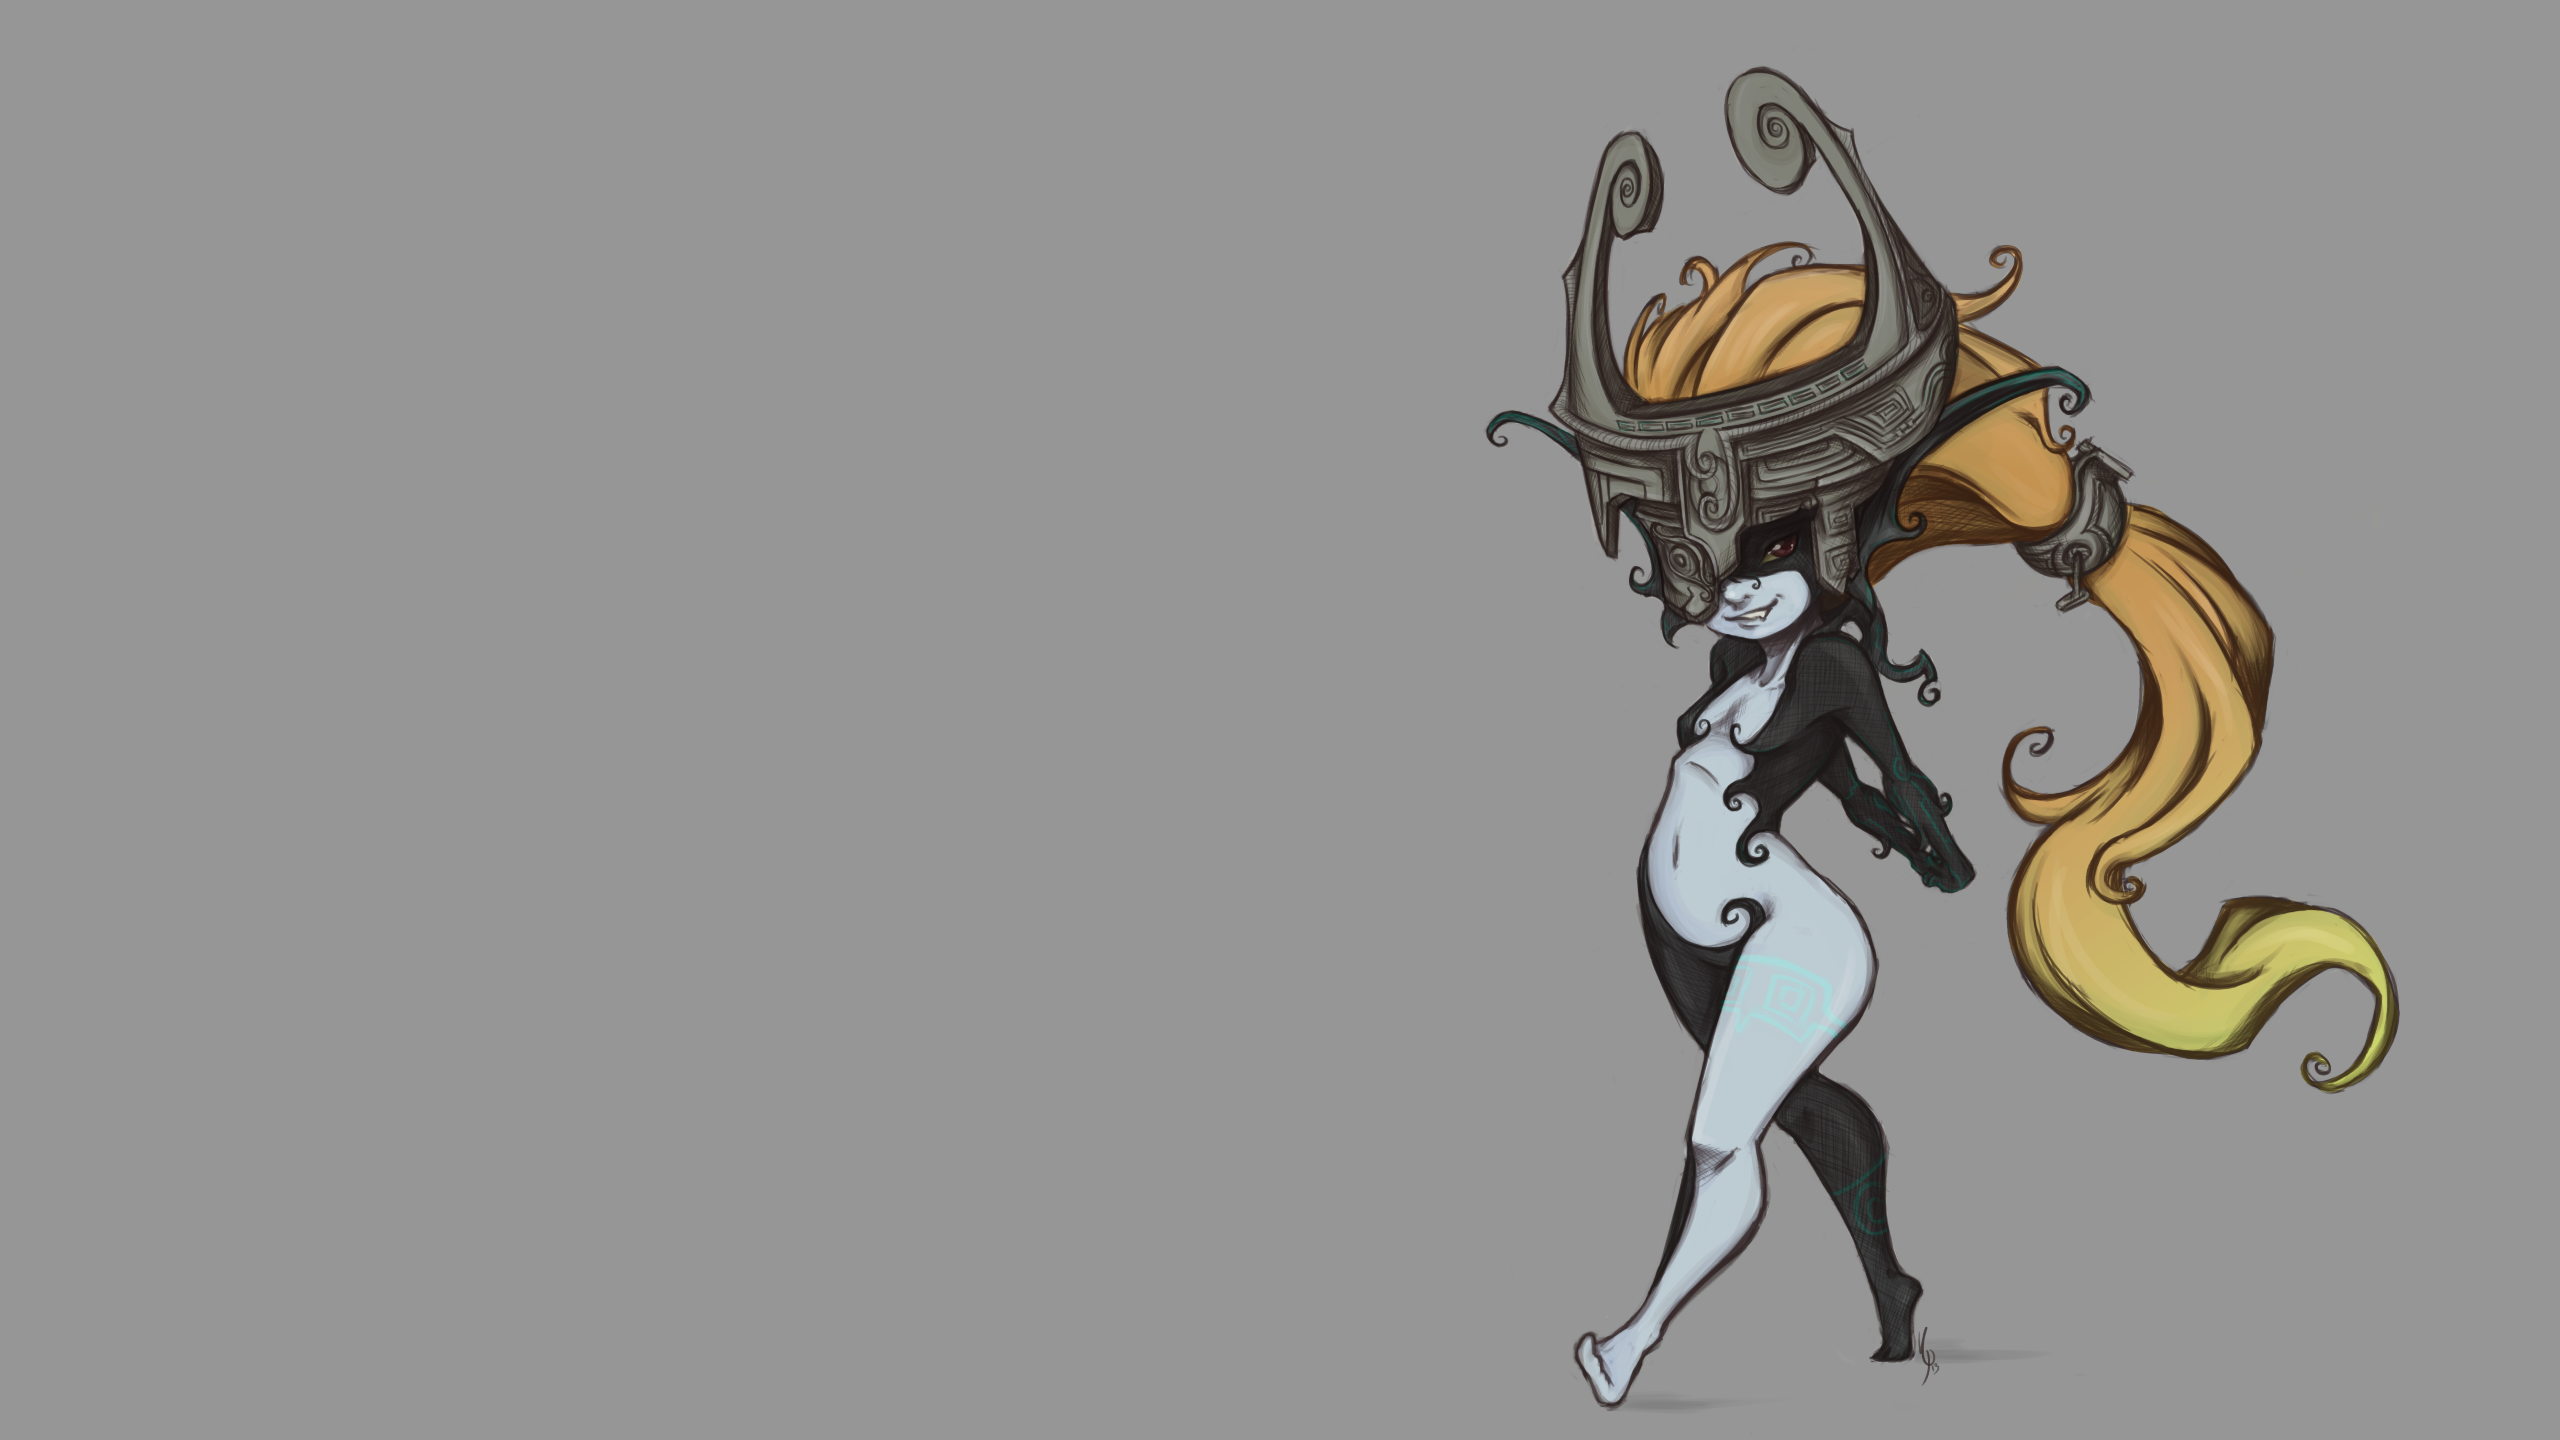 Anime 2560x1440 Midna The Legend of Zelda: Twilight Princess The Legend of Zelda watermarked video games video game art simple background gray background long hair belly legs video game girls